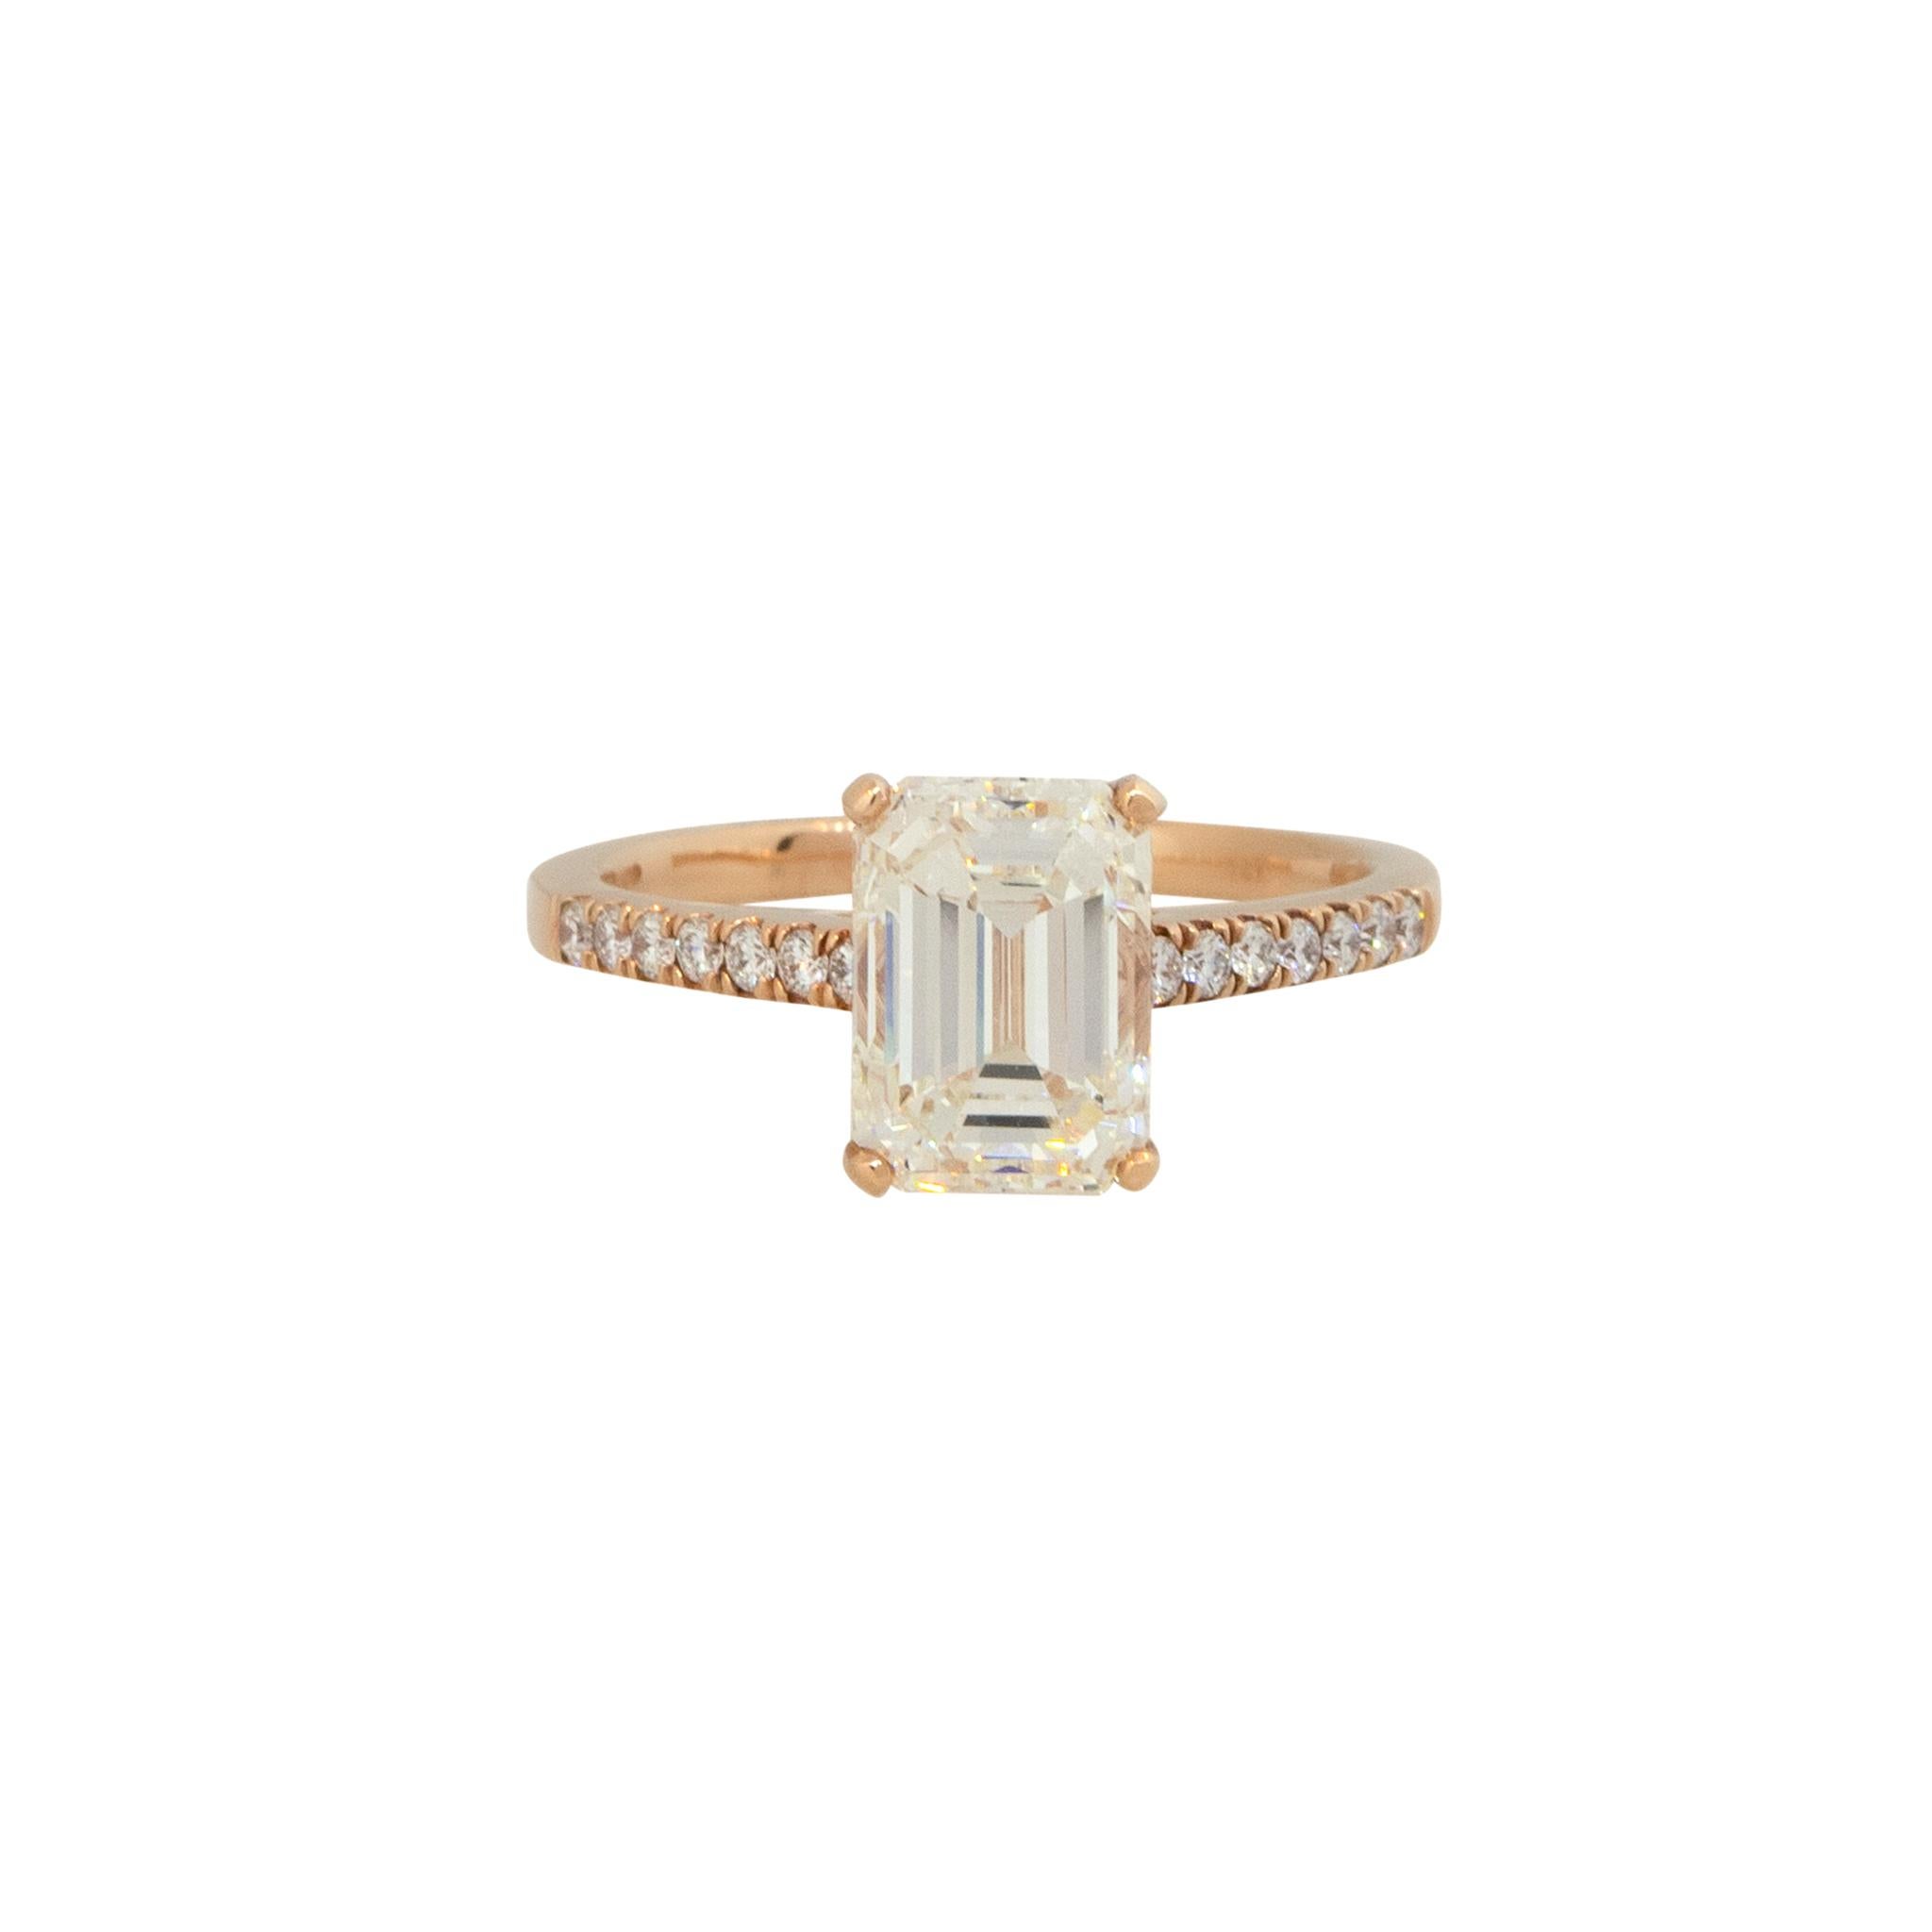 GIA Certified 14k Rose Gold 3.19ctw Emerald Cut Diamond Engagement Ring

Raymond Lee Jewelers in Boca Raton -- South Florida’s destination for diamonds, fine jewelry, antique jewelry, estate pieces, and vintage jewels.

Style:Women's 4 Prong